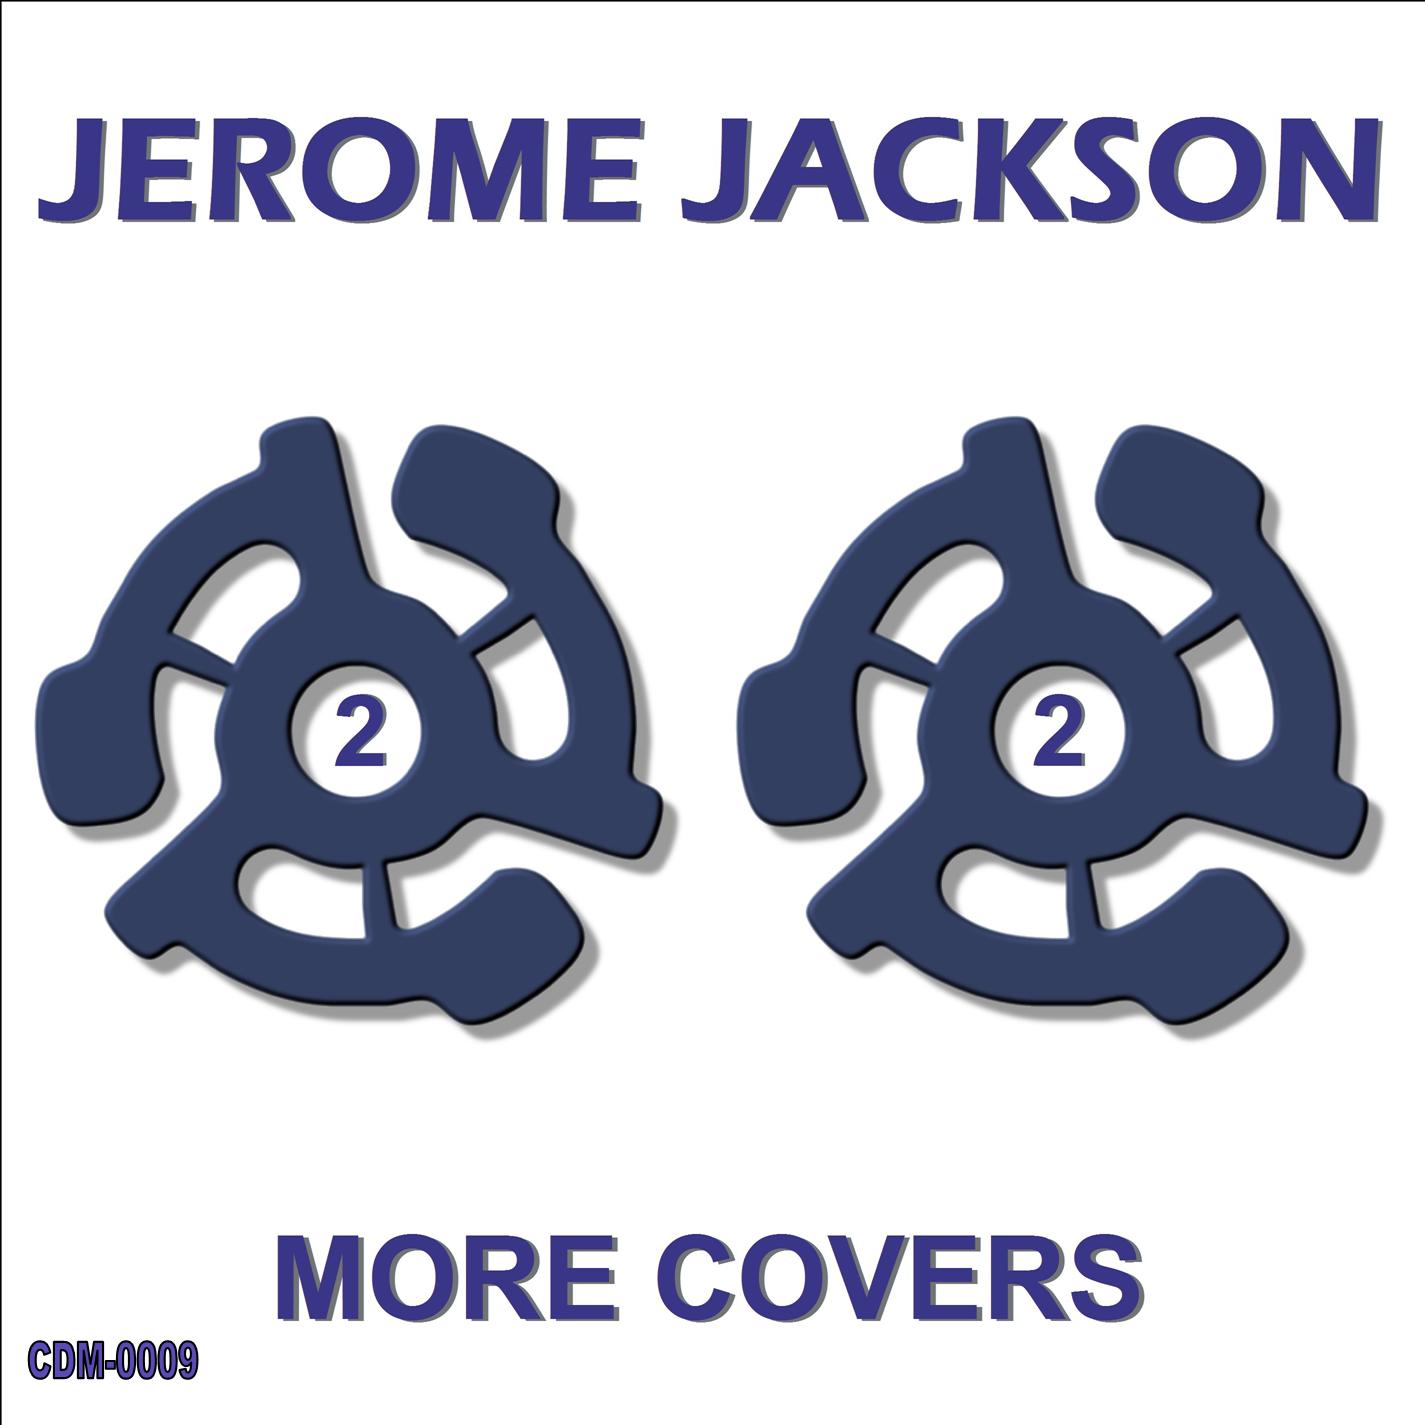 Covers 2 - More Covers